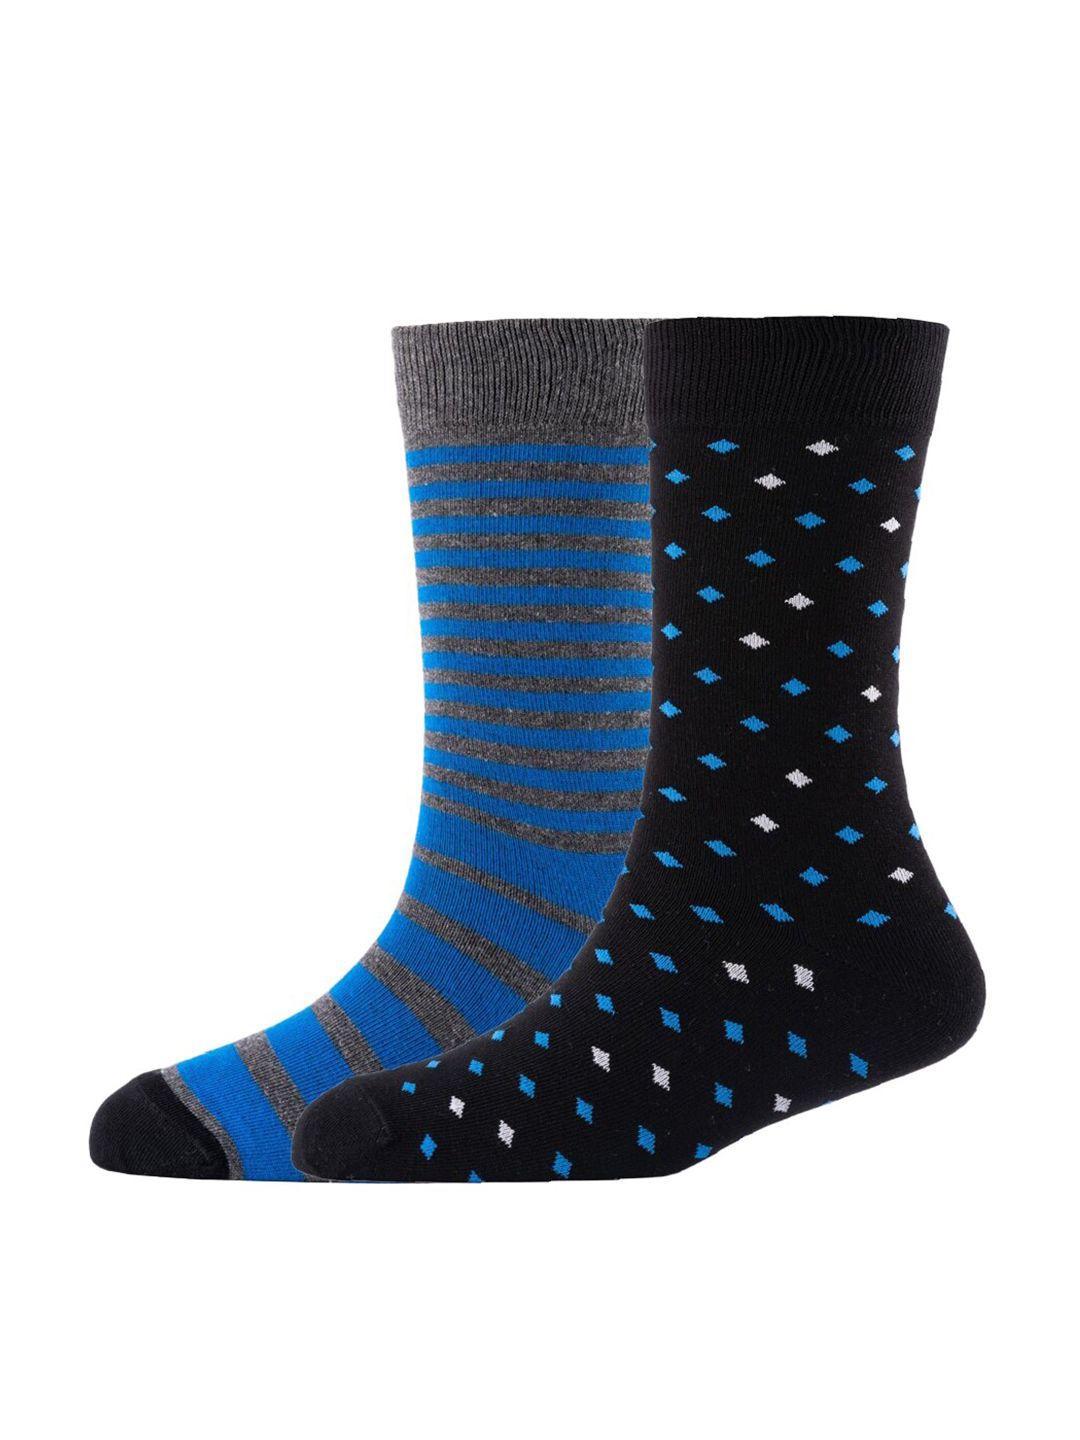 cotstyle men pack of 2 patterned cotton calf-length socks